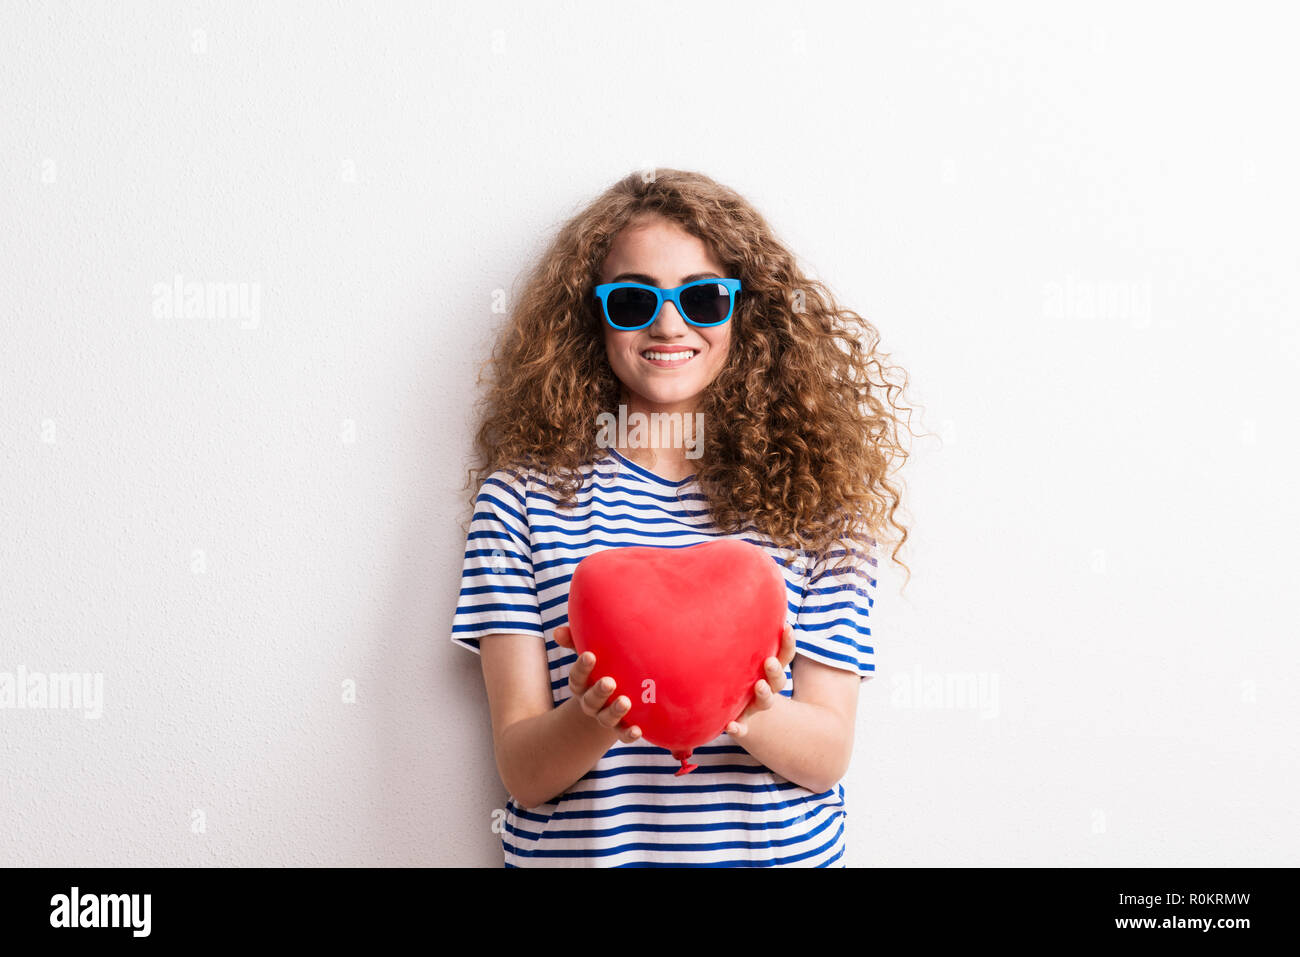 Young beautiful cheerful woman with sunglasses in studio, holding red heart. Stock Photo